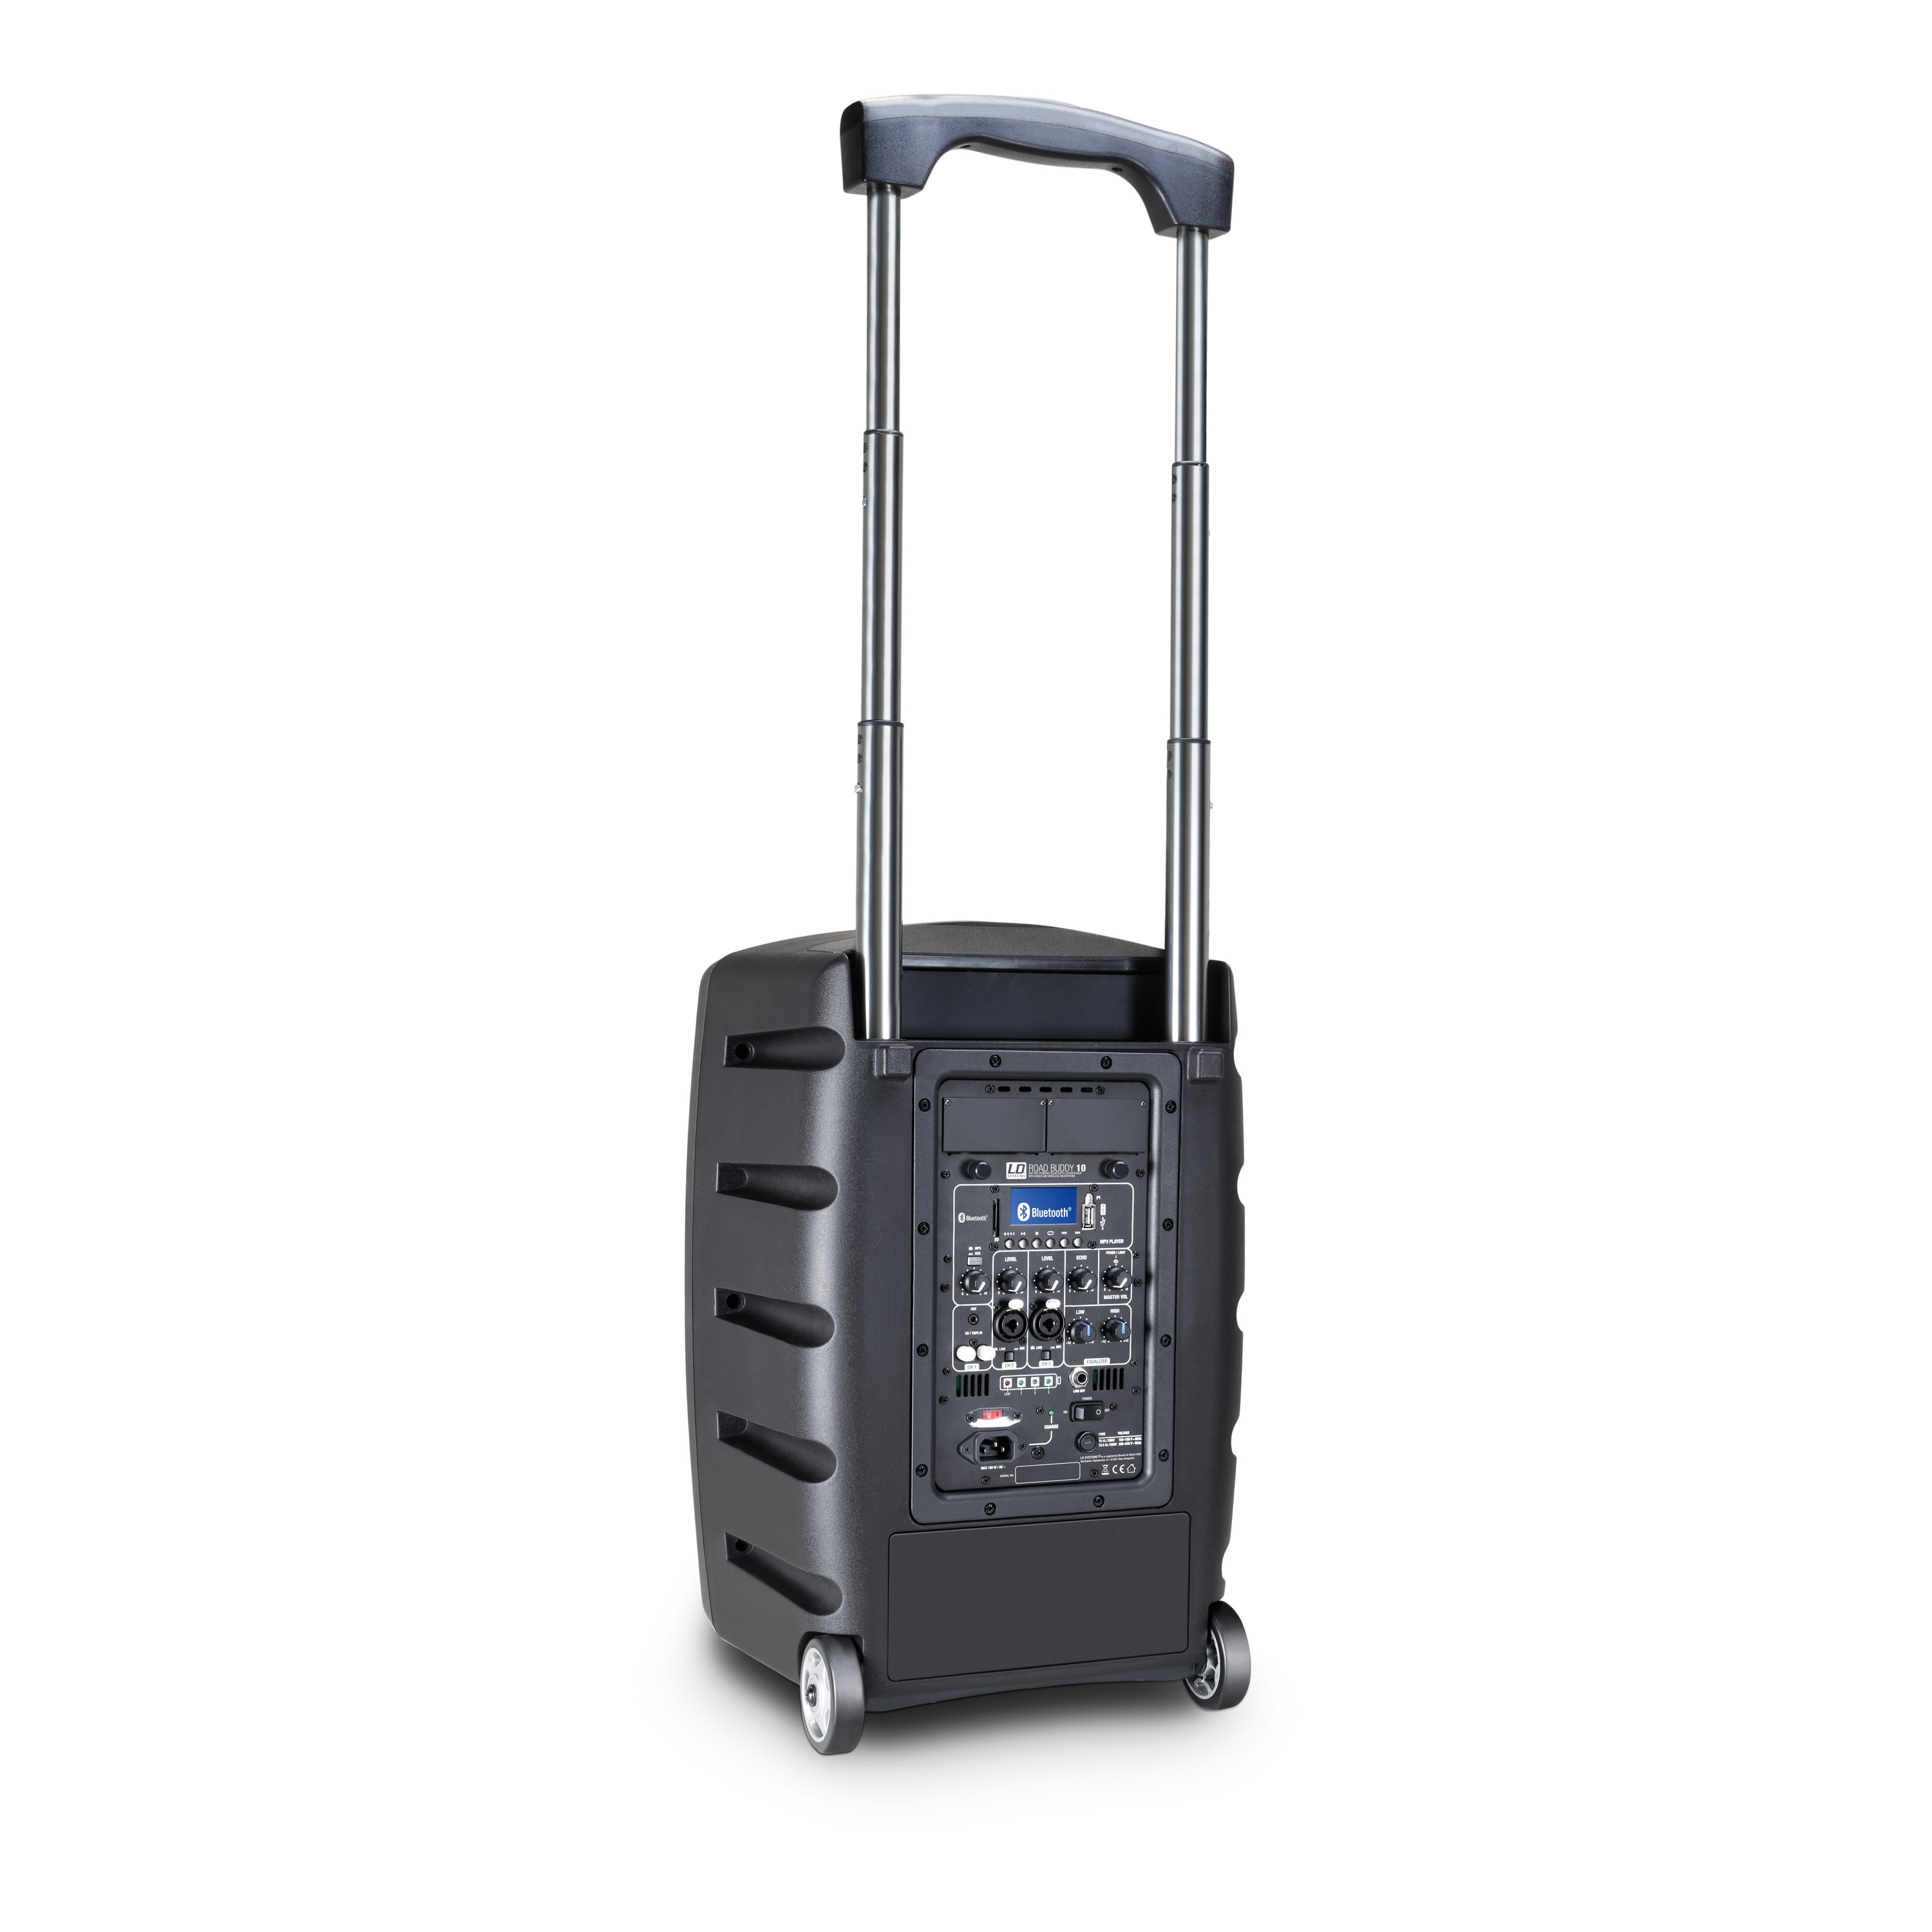 Ld Systems Roadbuddy 10 Basic - Mobile PA-Systeme - Variation 1